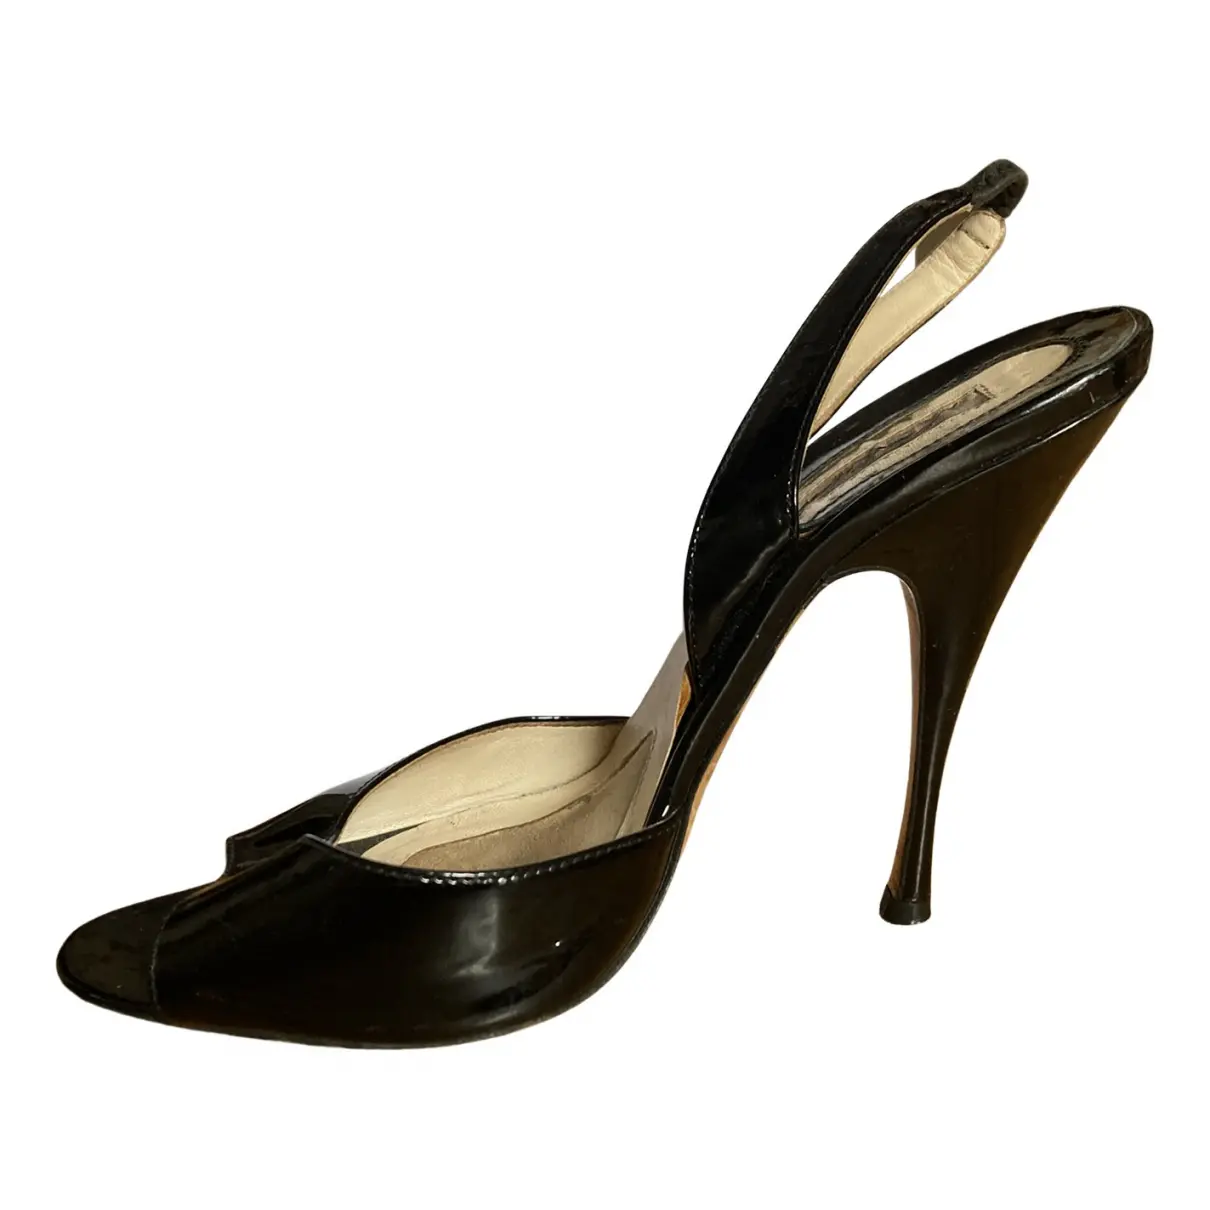 Patent leather sandals Brian Atwood